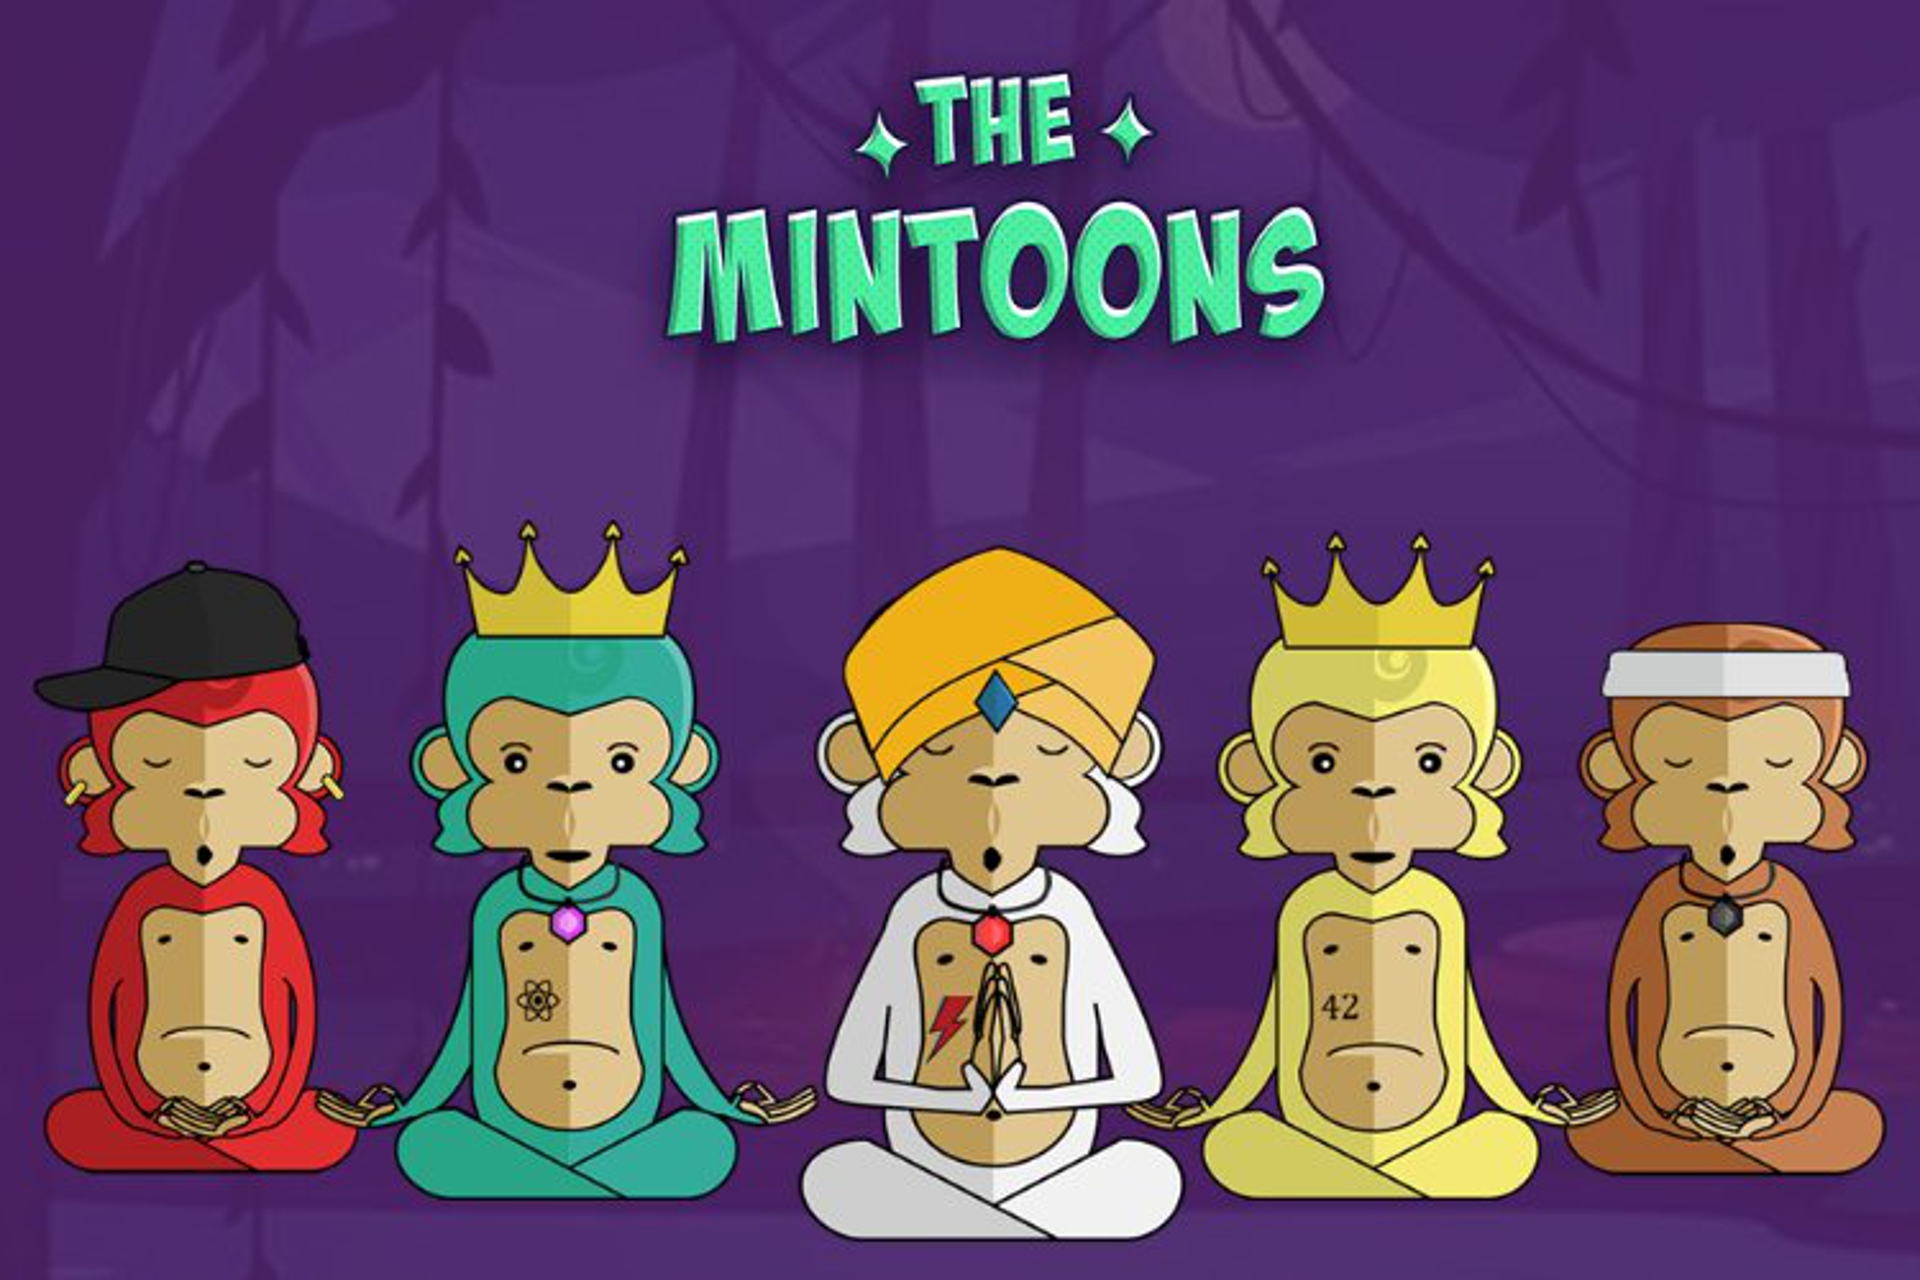 The Mintoons